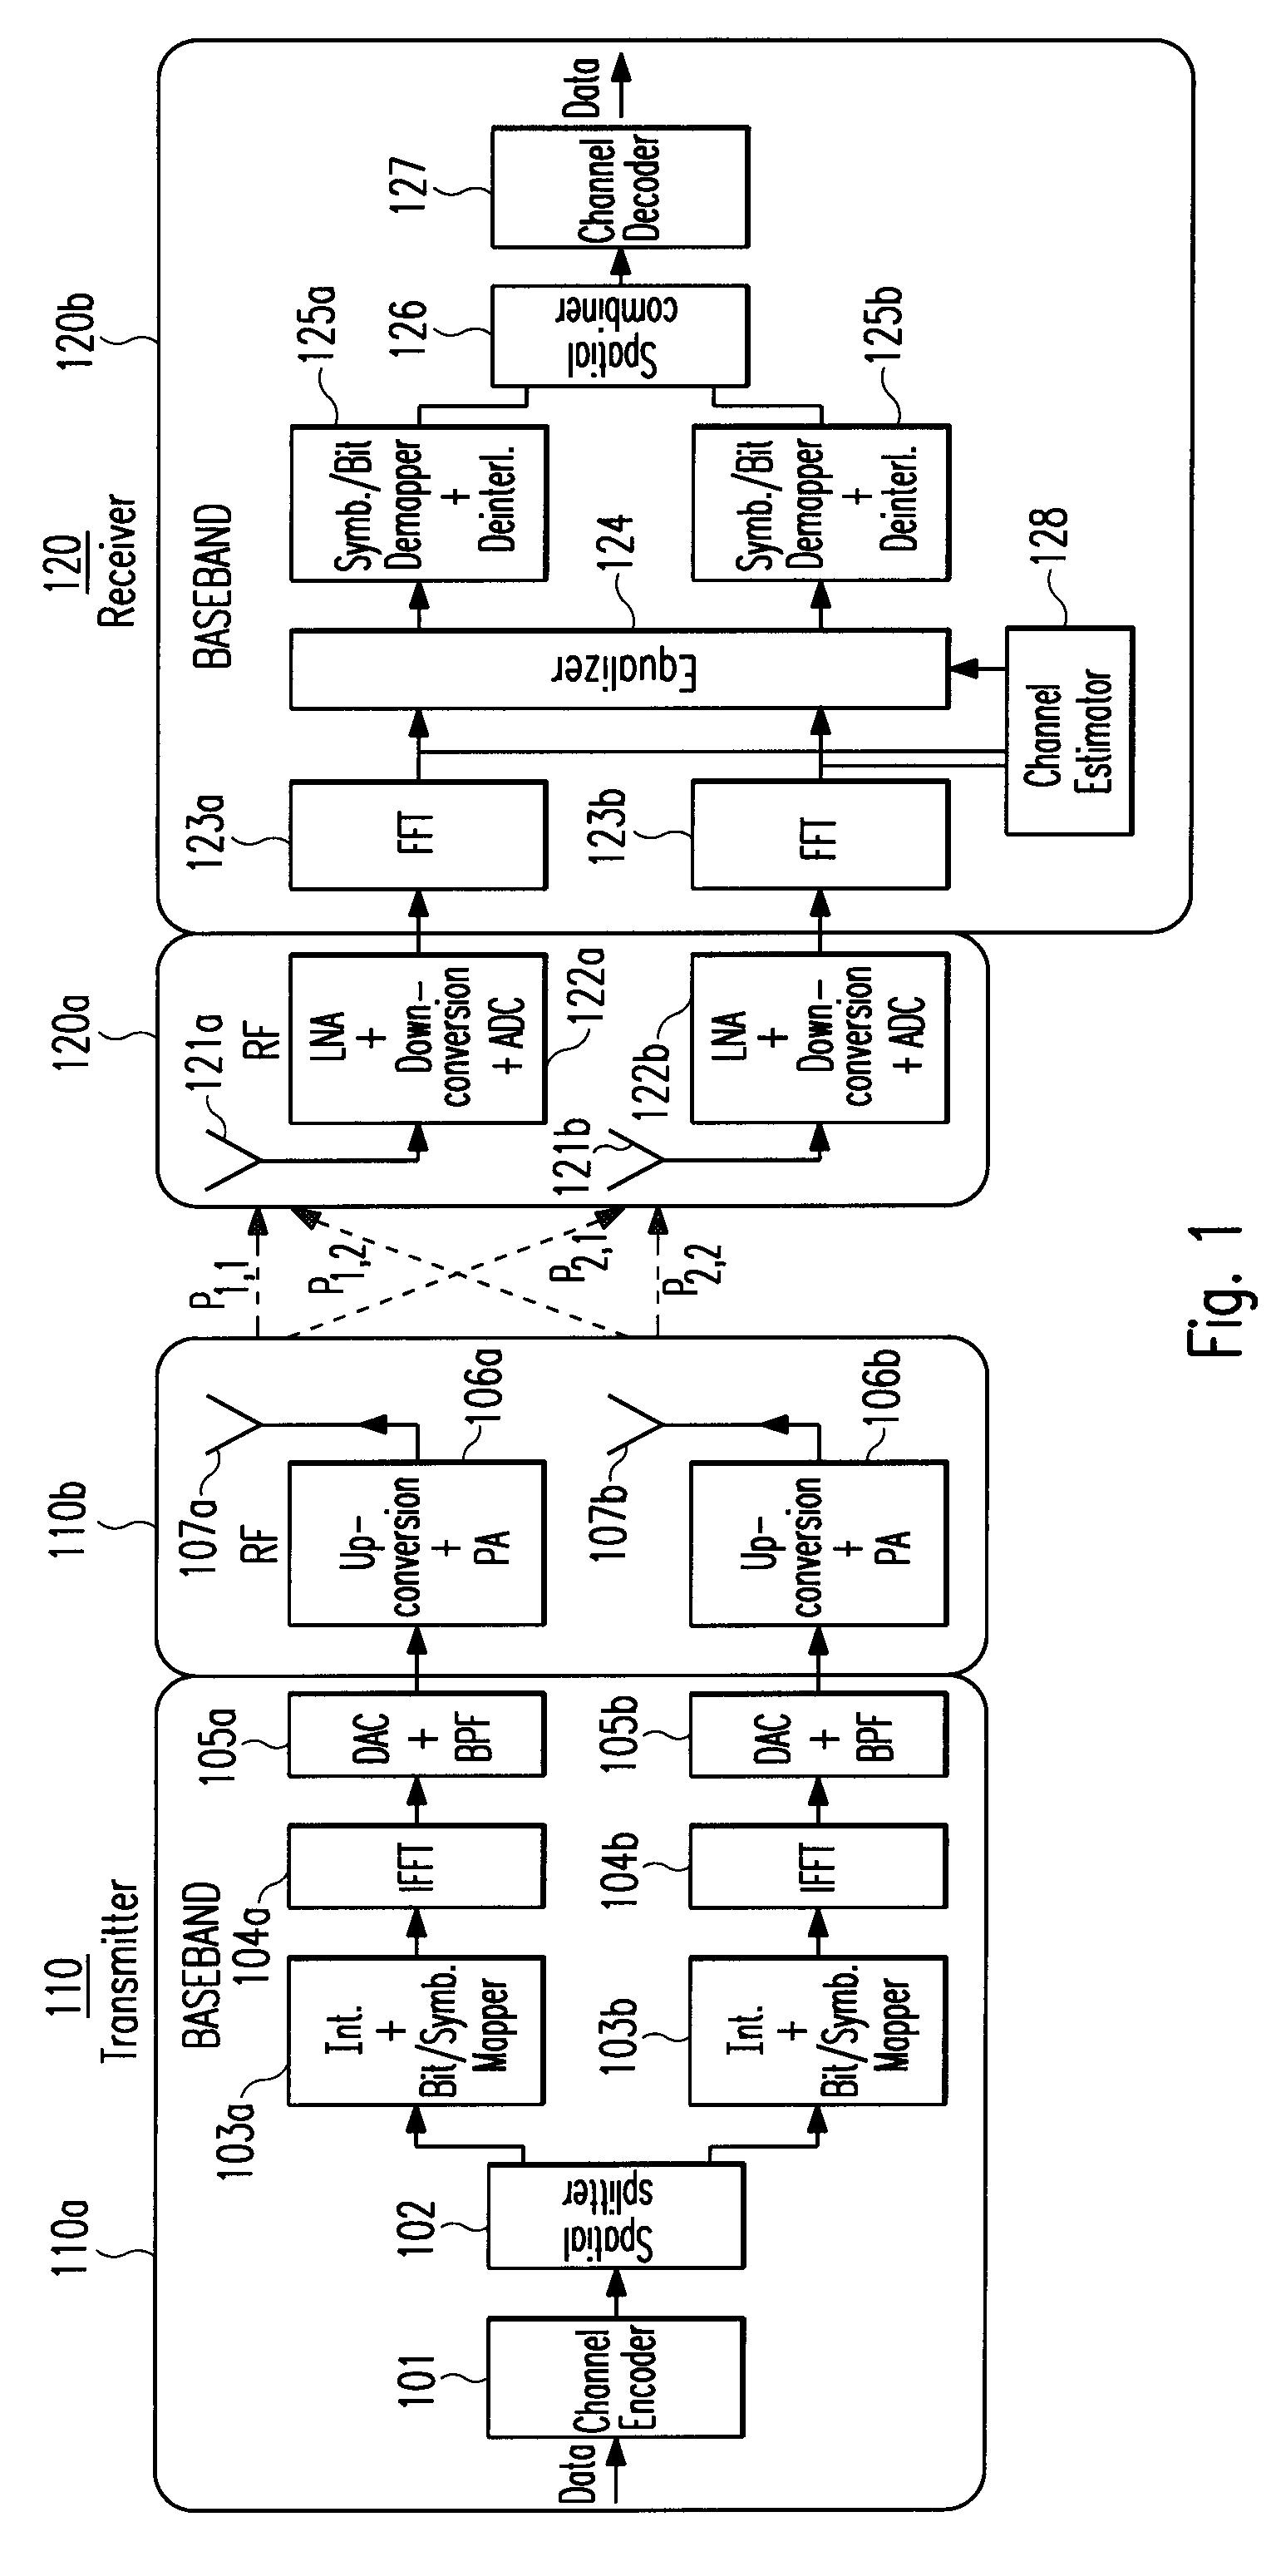 Multiple-input multiple-output spatial multiplexing system with dynamic antenna beam combination selection capability